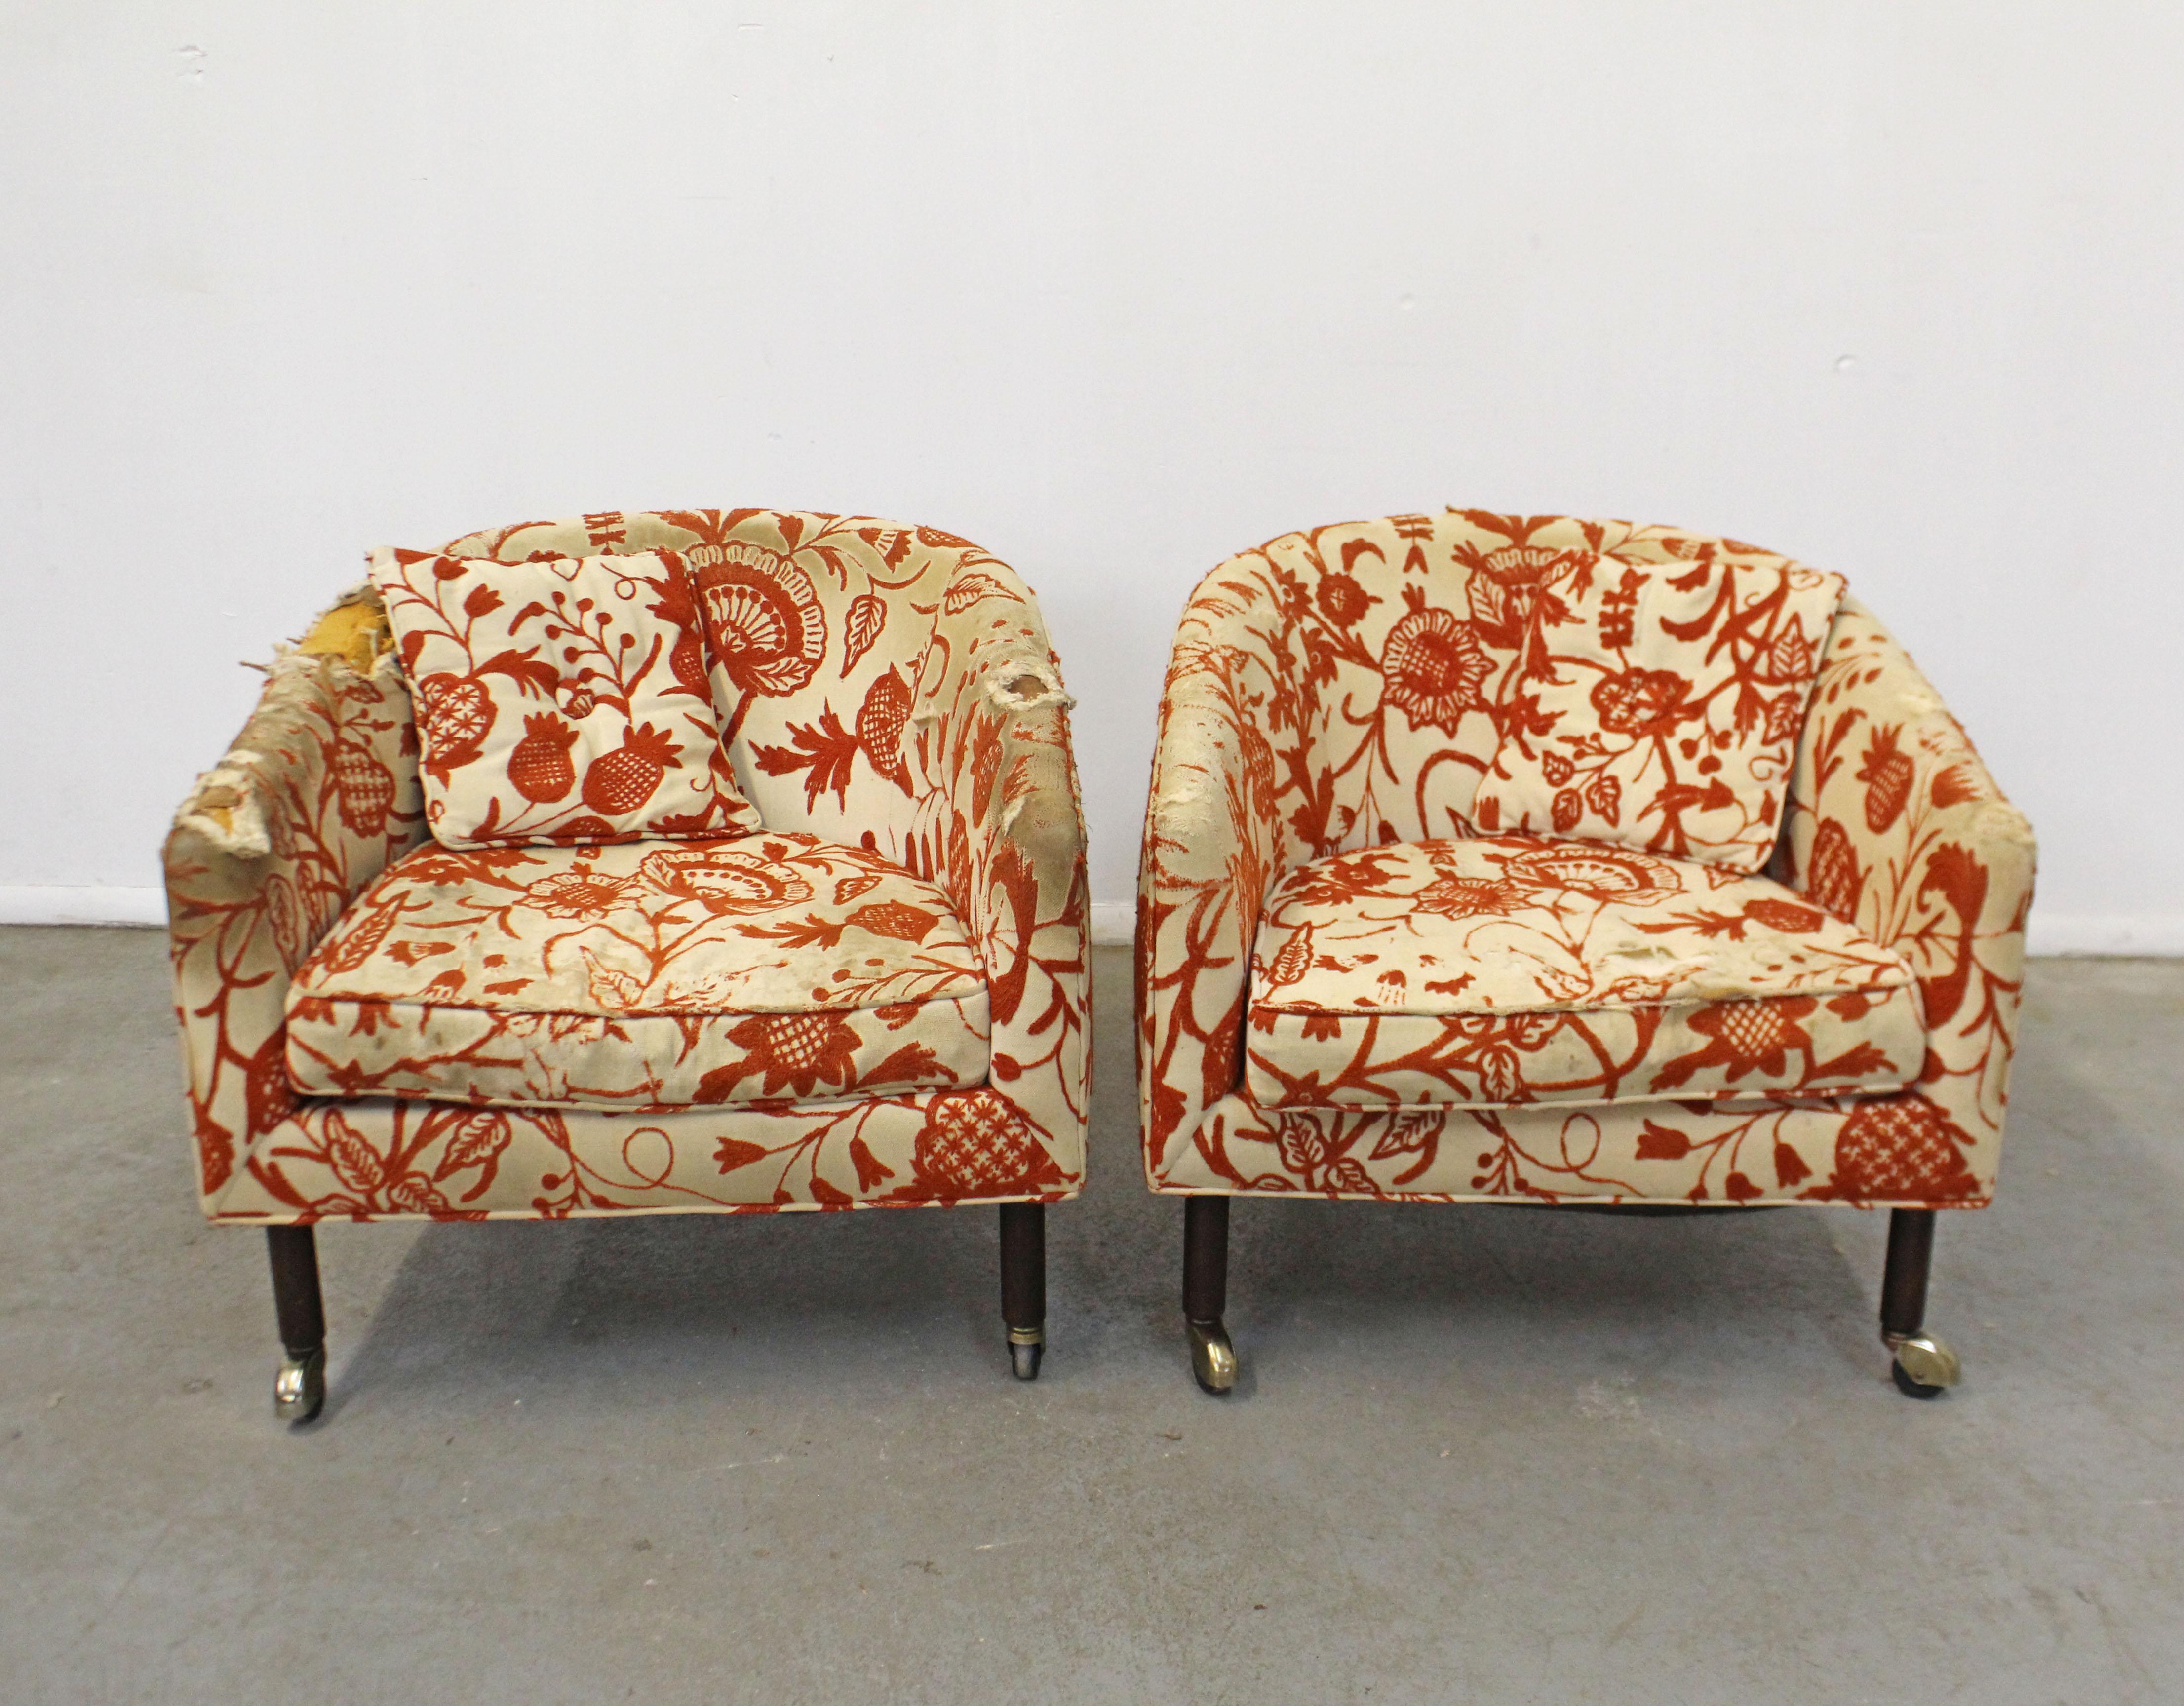 Offered is a pair of vintage midcentury lounge chairs on caster wheels bases by Harvey Probber. This set needs to be reupholstered, shows significant wear. Needs new cushions as well. Still a great set with lots of potential! They're signed by